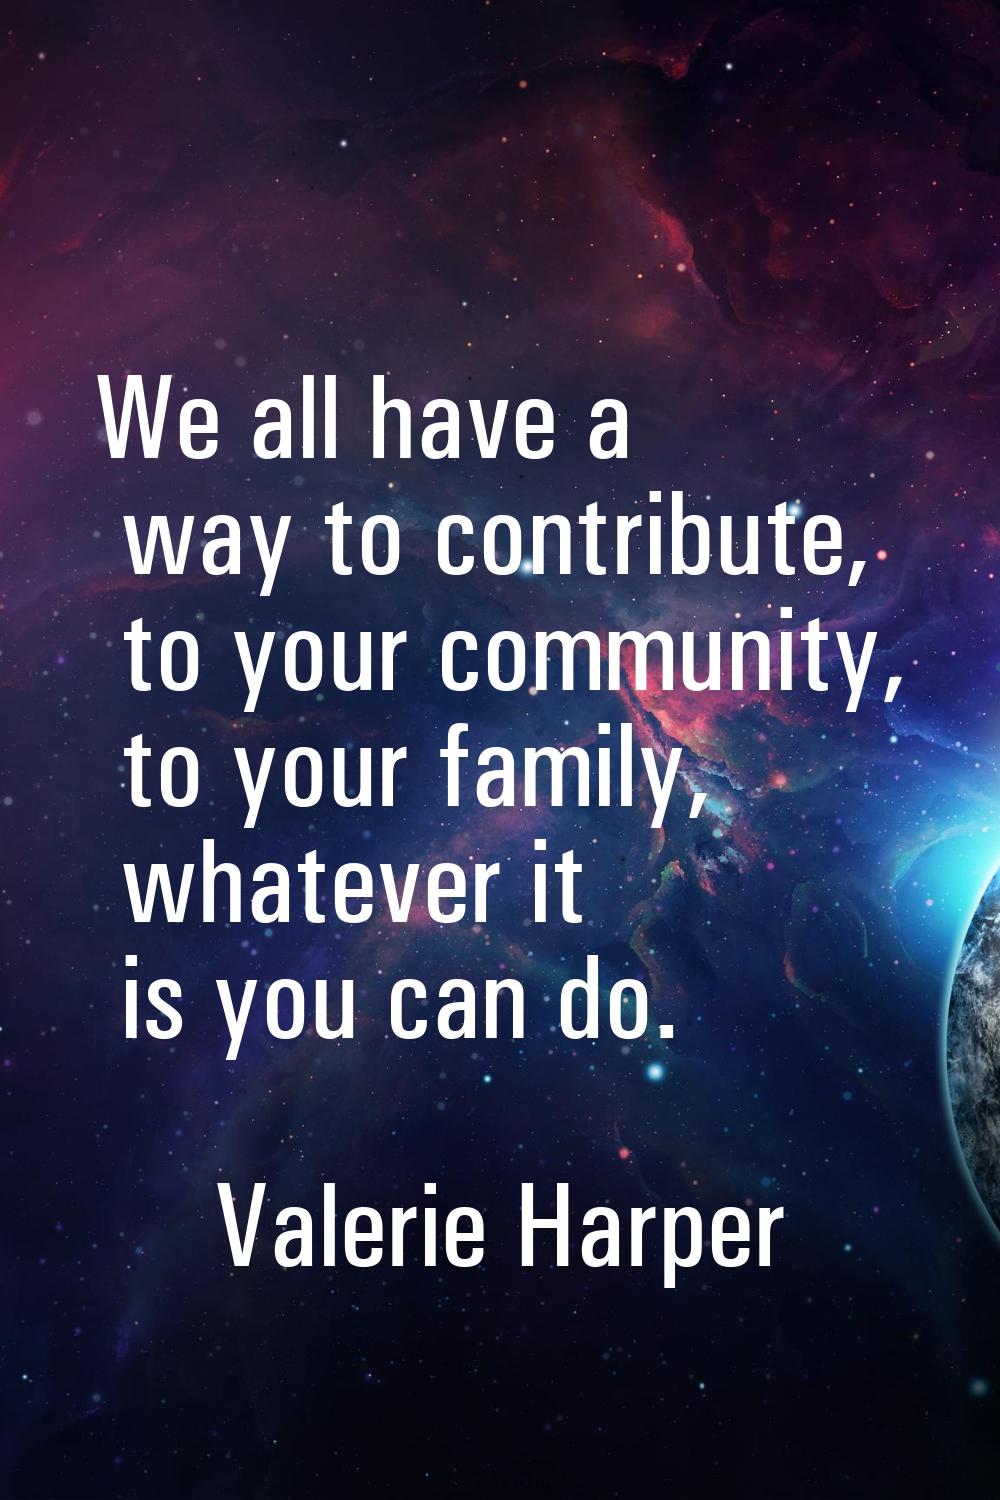 We all have a way to contribute, to your community, to your family, whatever it is you can do.